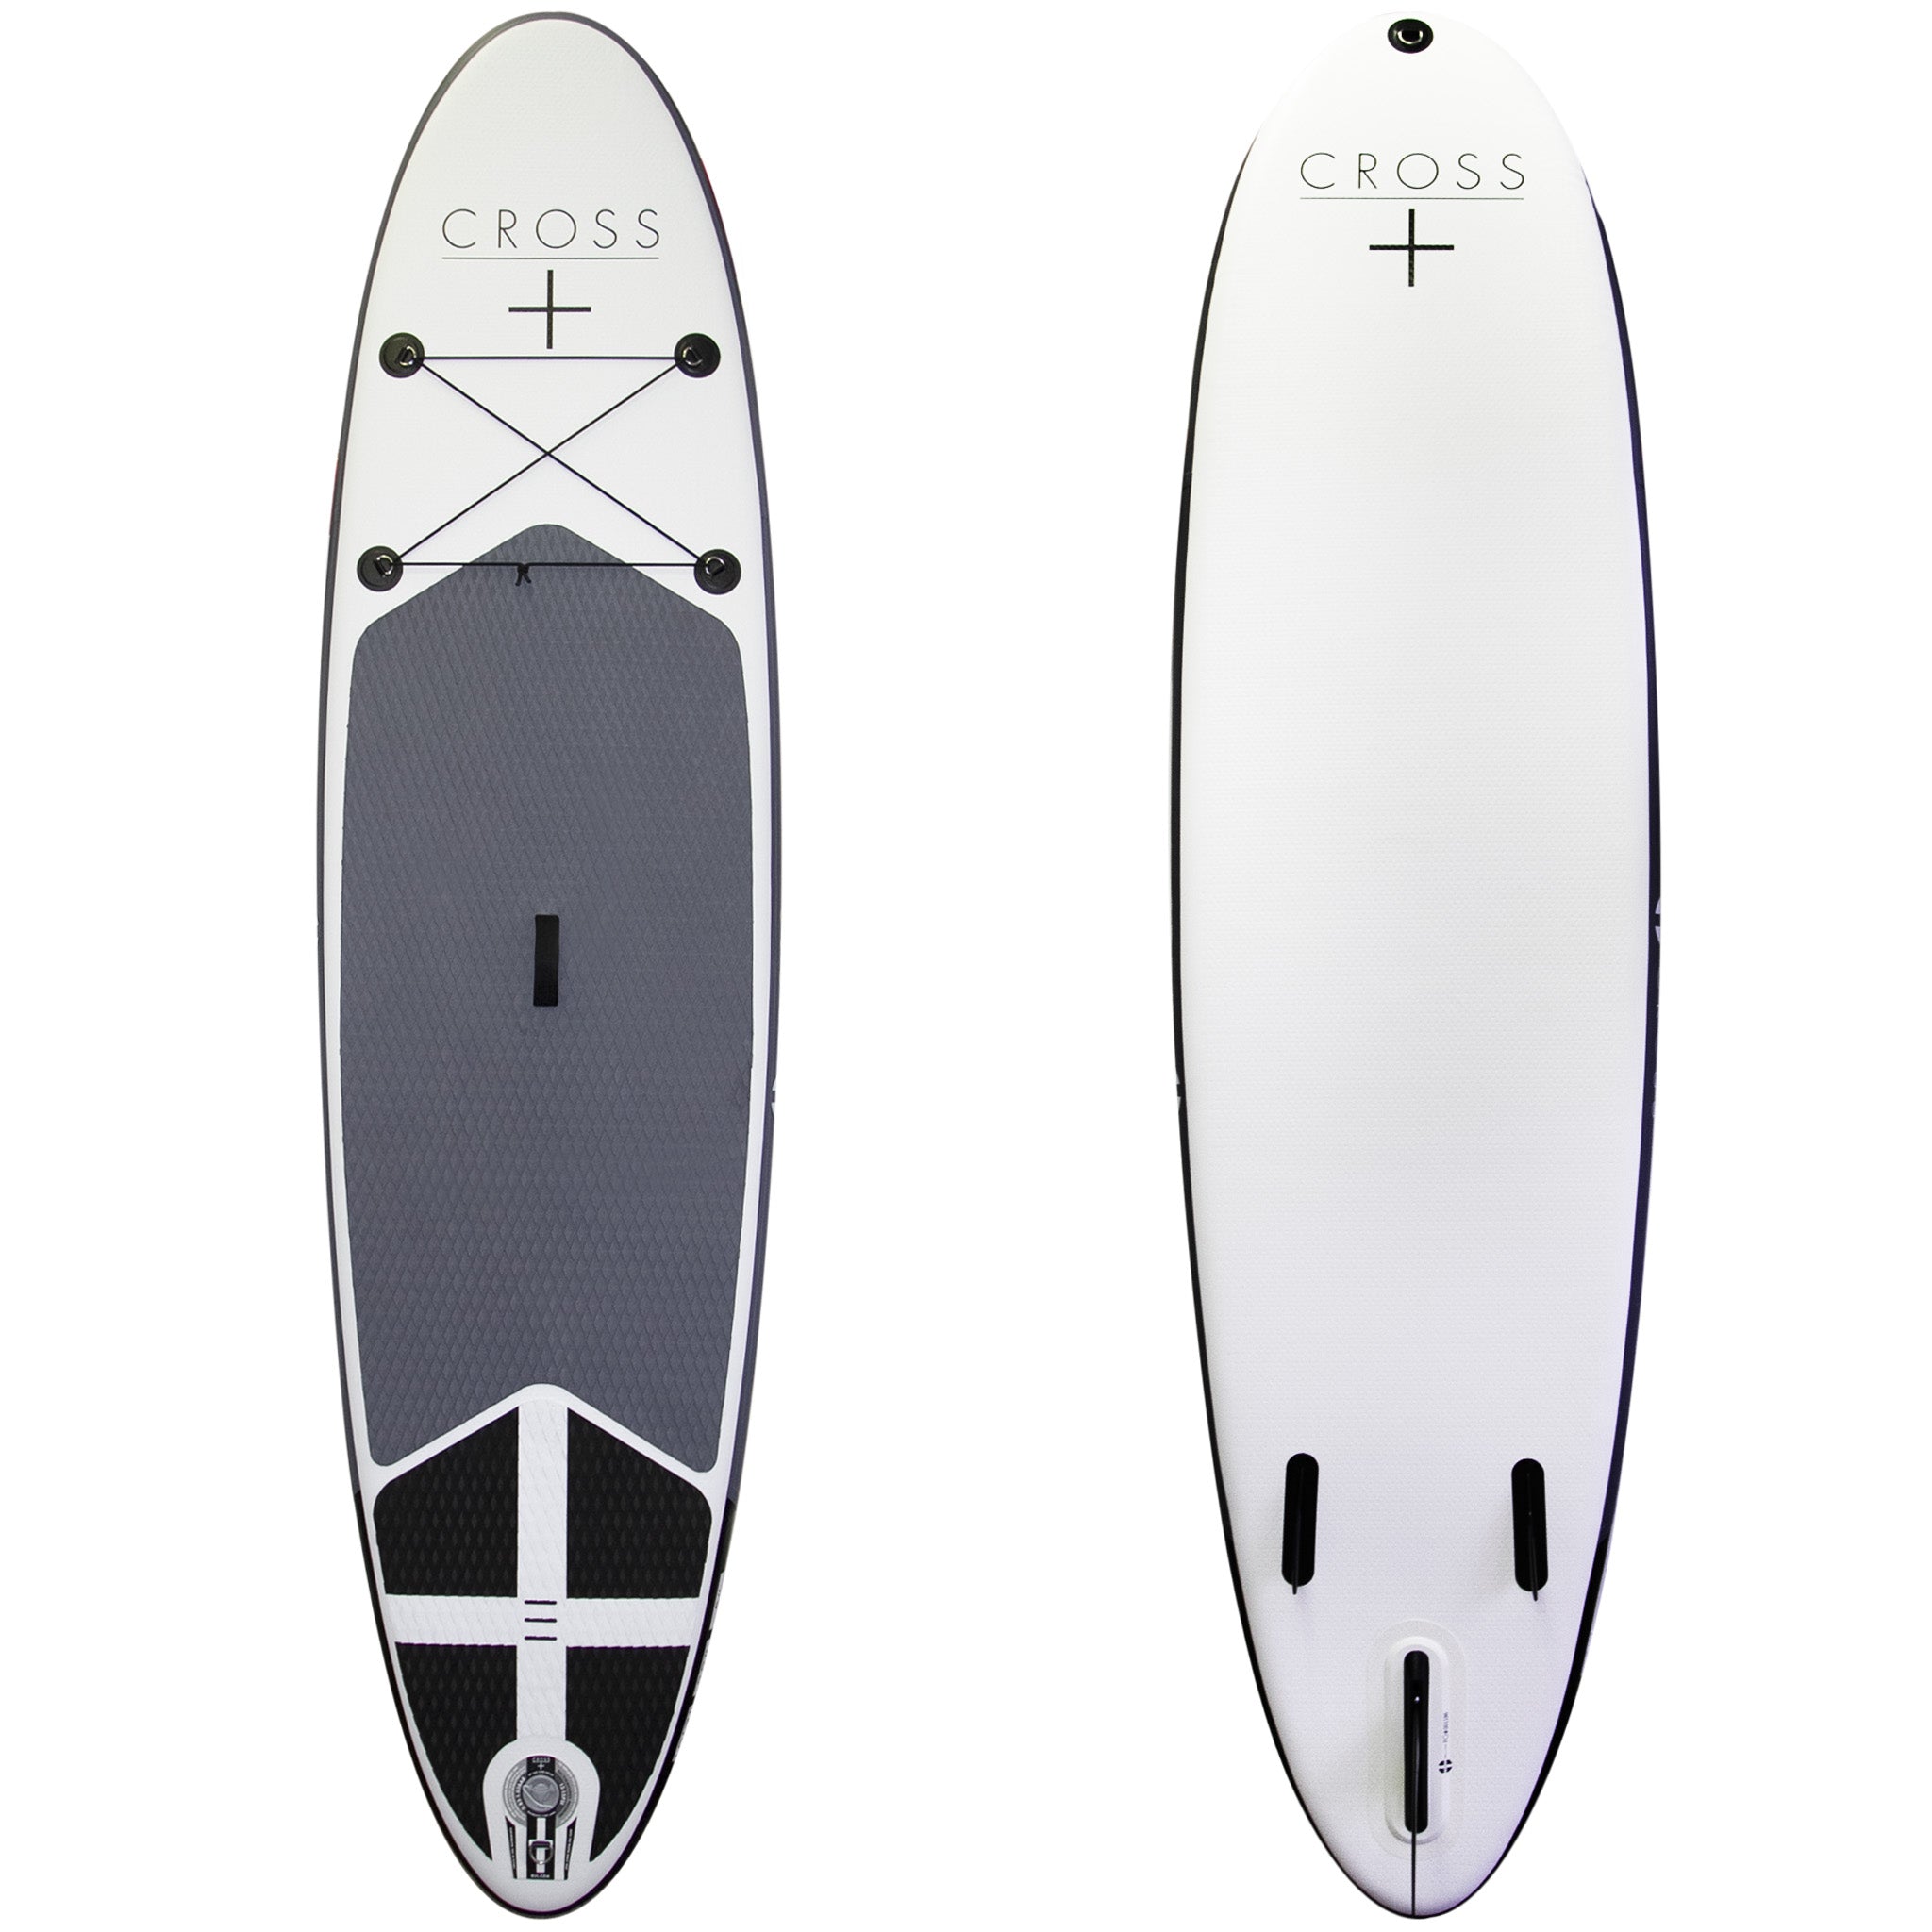 Gul 10' 7" CROSS Inflatable Paddle Board SUP 2020 front and back